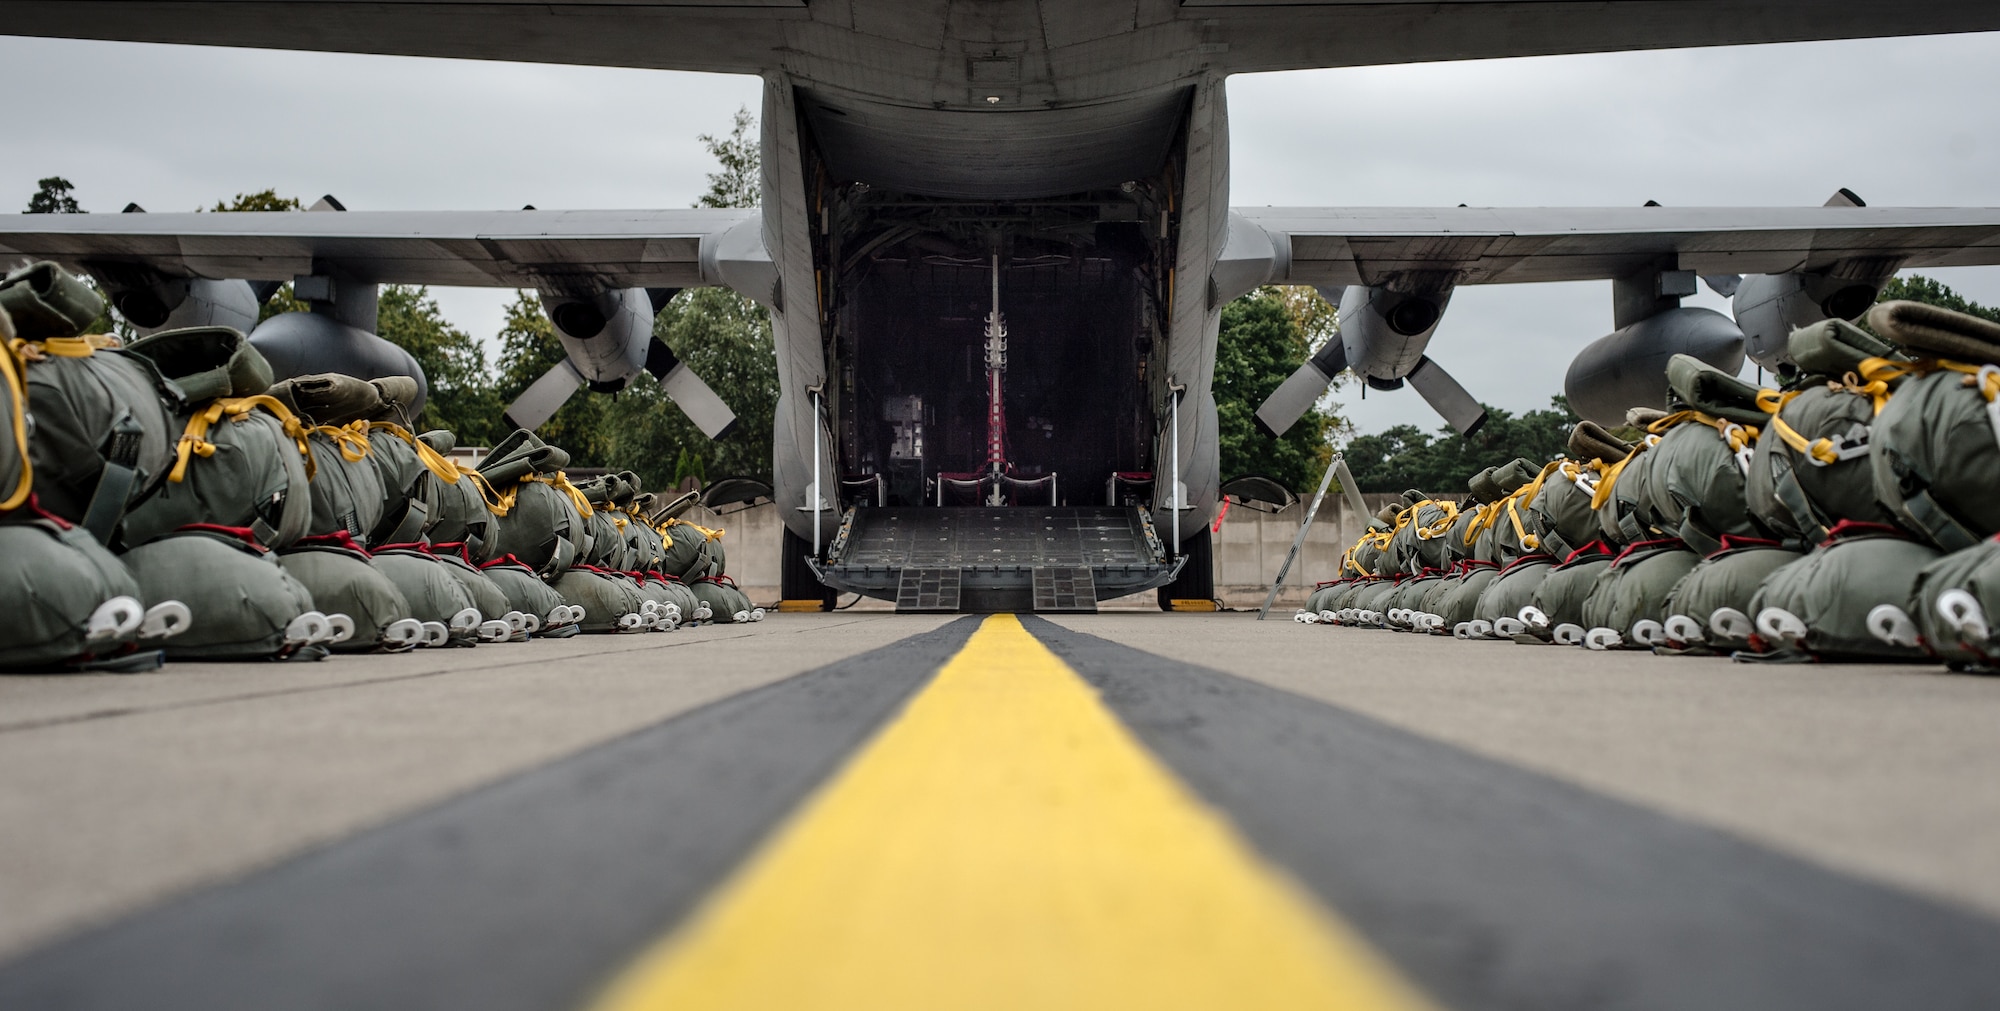 A C-130 from the Air National Guard waits on the Ramstein Air Base flightline, Germany, Sept. 3, 2014, just days before it will be loaded up with Army and Air Force paratroopers to support the Steadfast Javelin II exercise. Steadfast Javelin II is a NATO-led exercise involving more than 2,000 service members from several nations, and takes place across Estonia, Germany, Latvia, Lithuania and Poland. The exercise focuses on increasing interoperability and synchronizing complex operations between allied air and ground forces through airborne and air-assault missions. (U.S. Air Force photo/ Airman 1st Class Jordan Castelan)